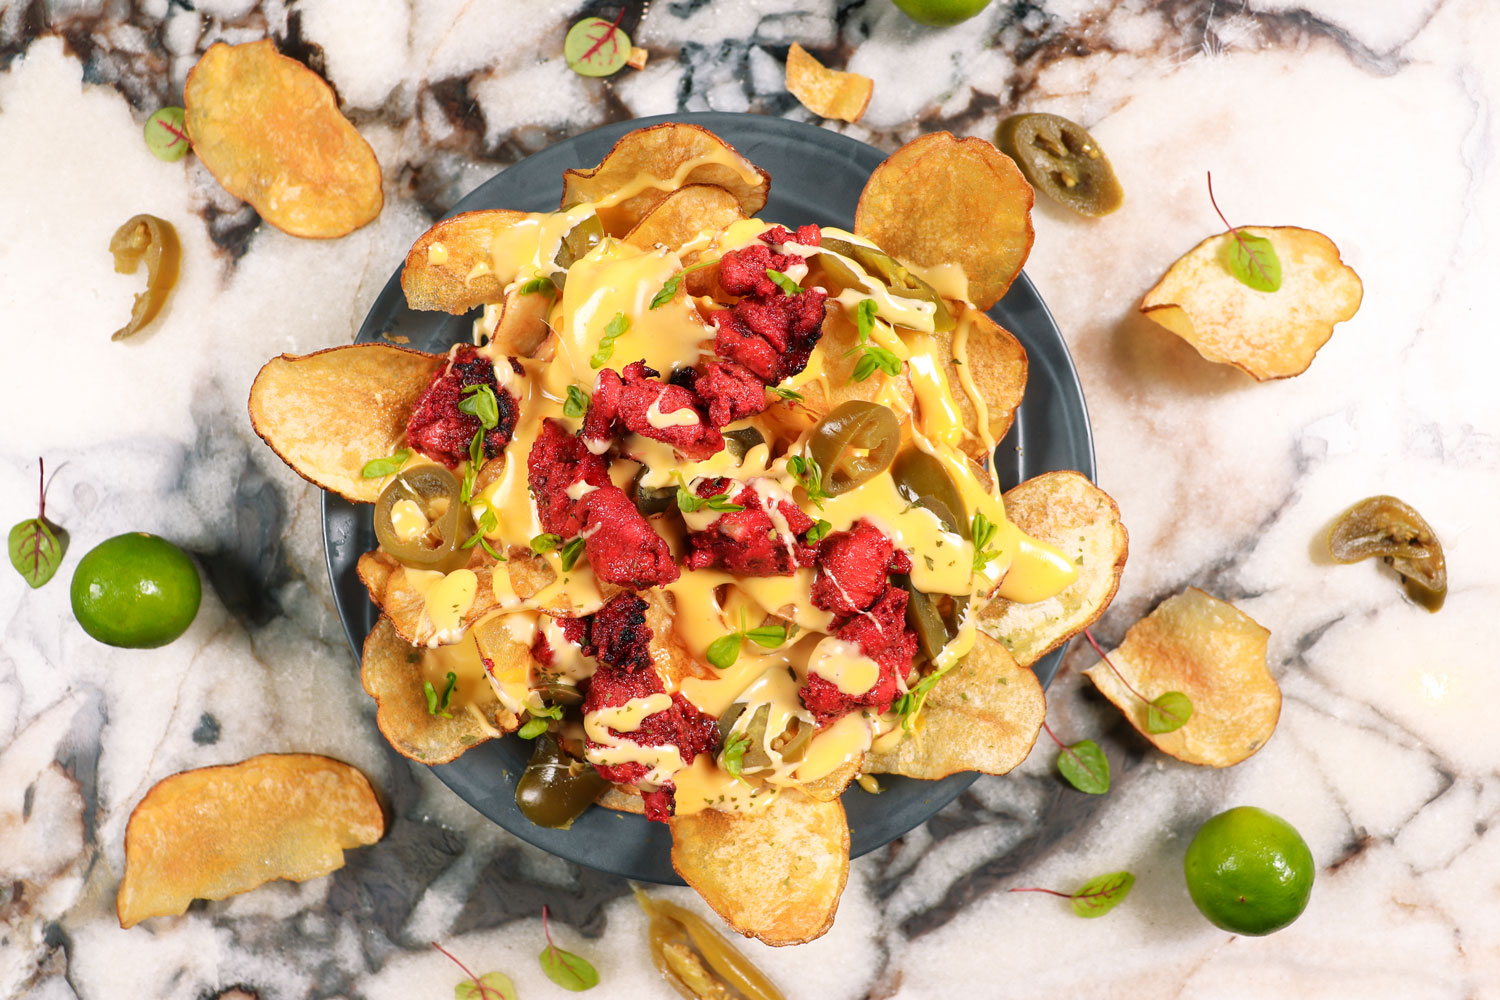 Hand-Cut Crispy Chip Nachos topped with Tandoori Chicken, Jalapeños and Melted Cheddar